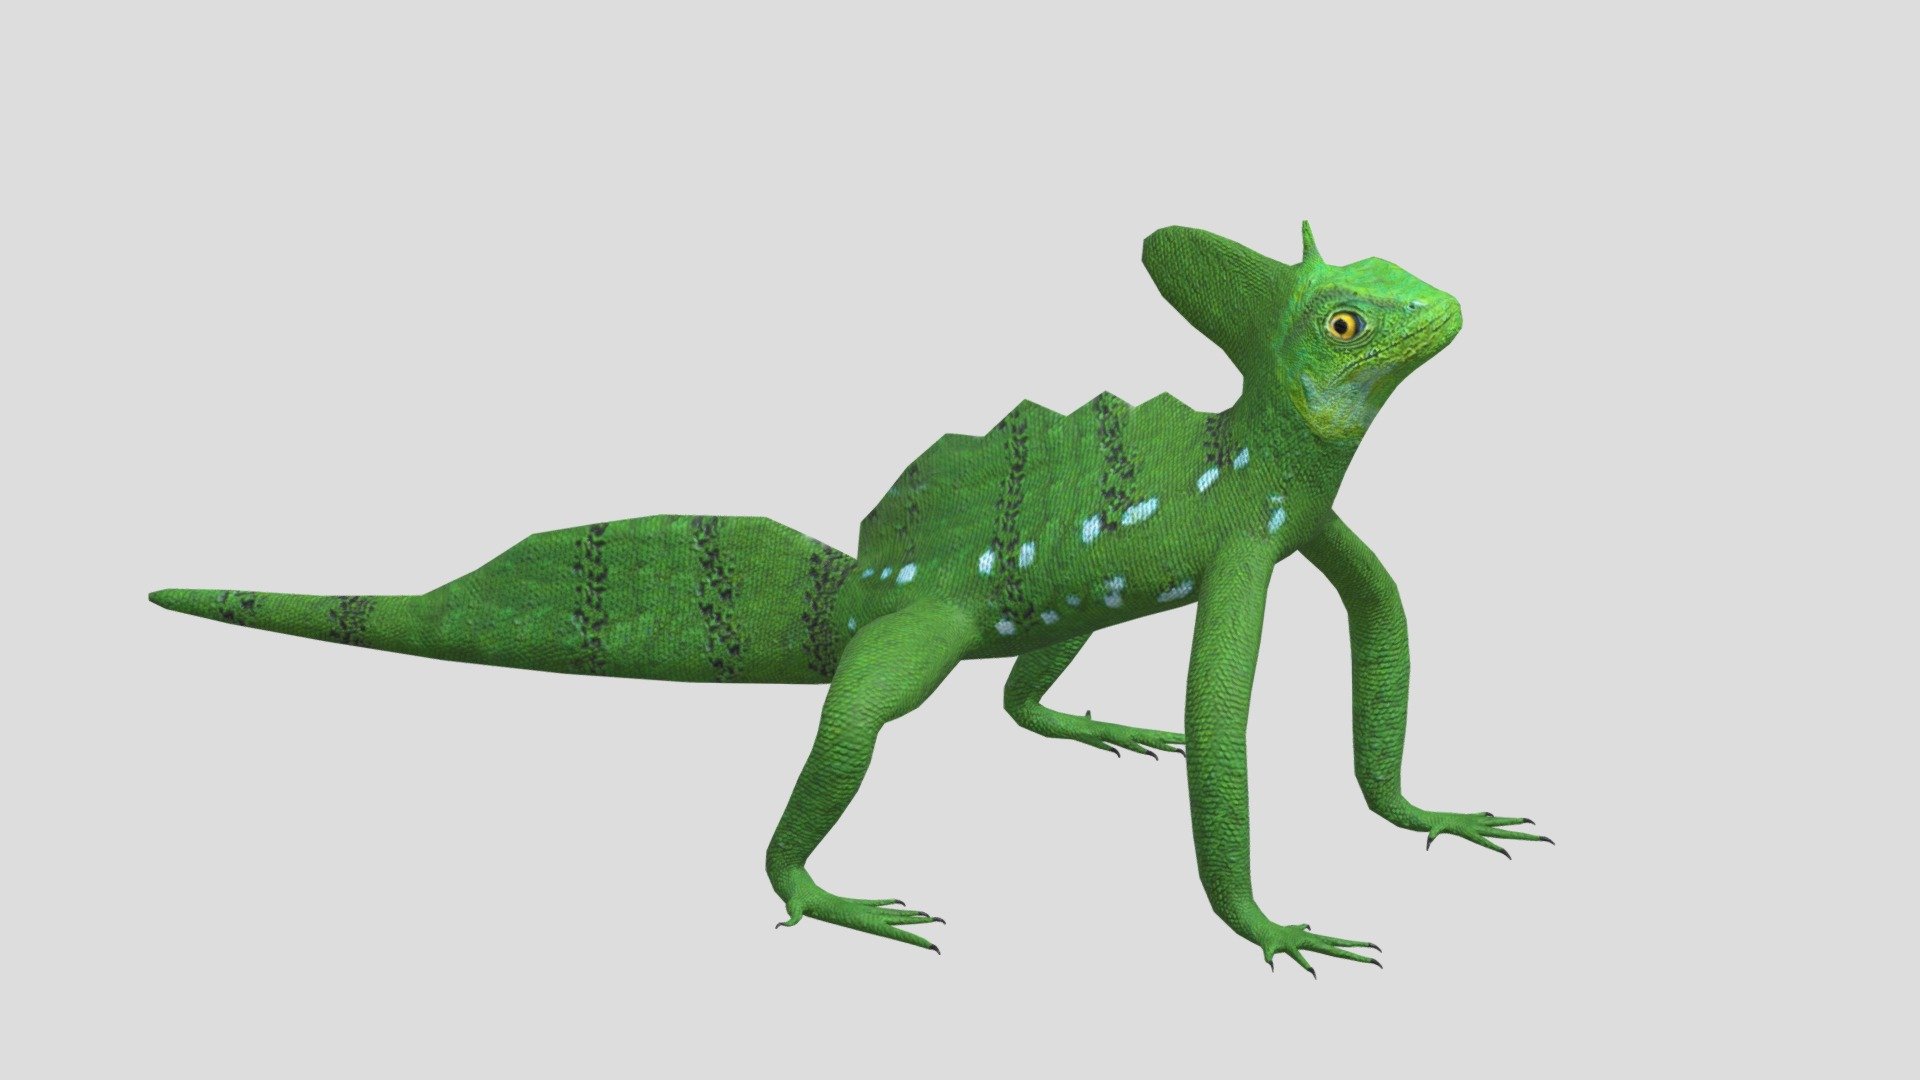 Digital 3d model of Basilisk Lizard.
The product includes:

-The model is one single object
-Textures JPEG- color,normal and roughness  maps
-Texture size 2048 x 2048 pxls.
- No special plugin needed to open scene 3d model